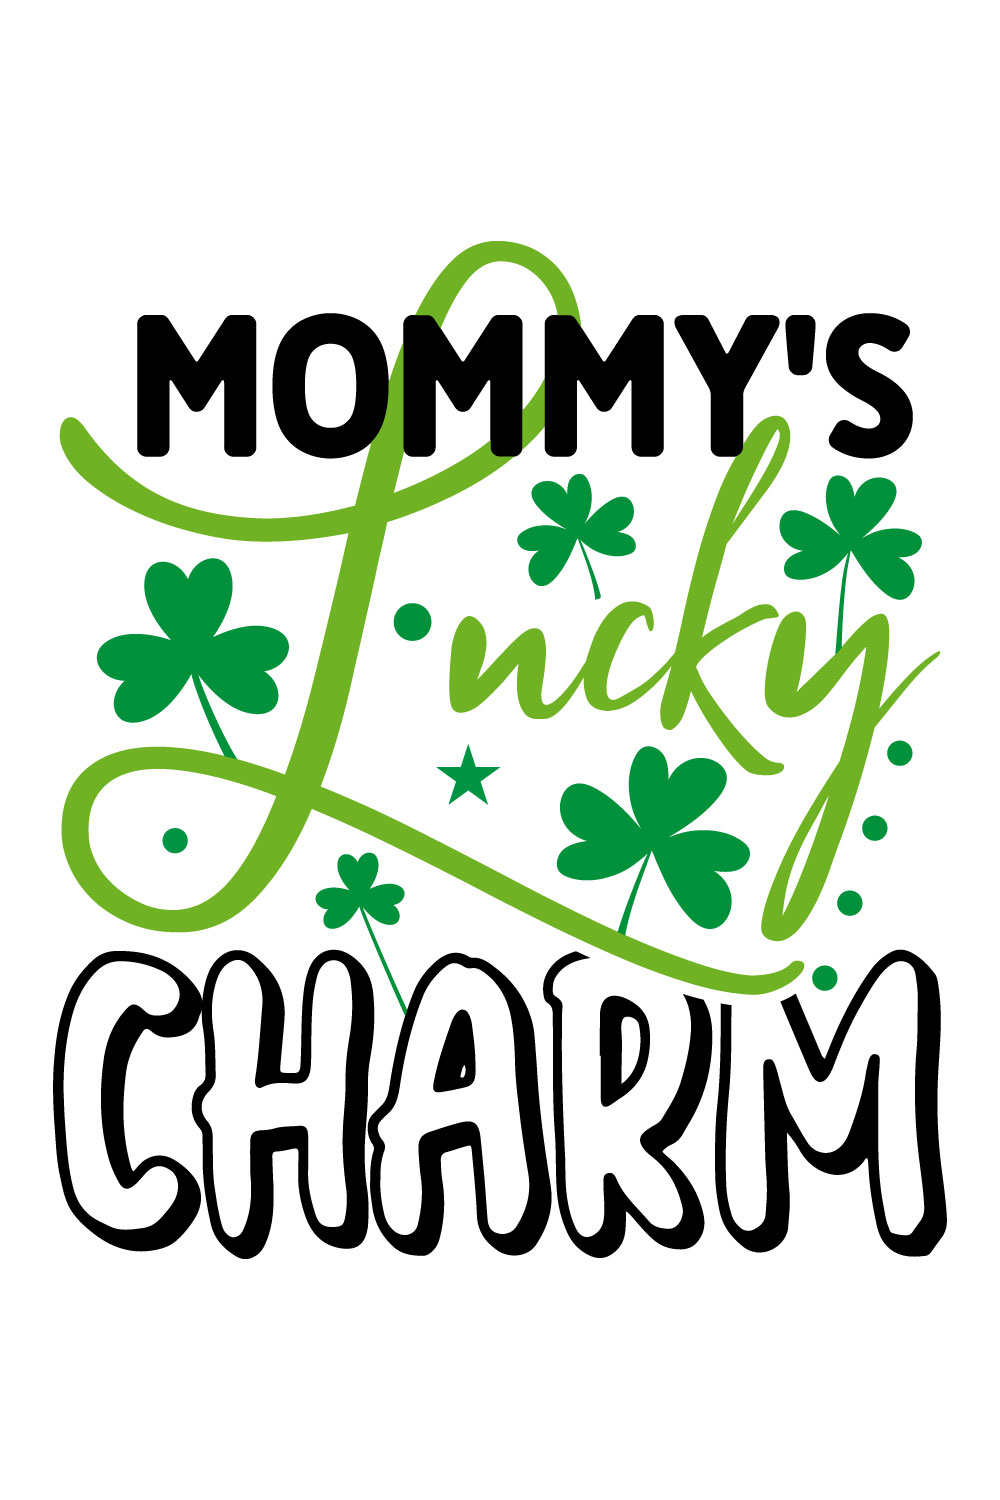 Image for prints with amazing inscription Mommys Lucky Charm